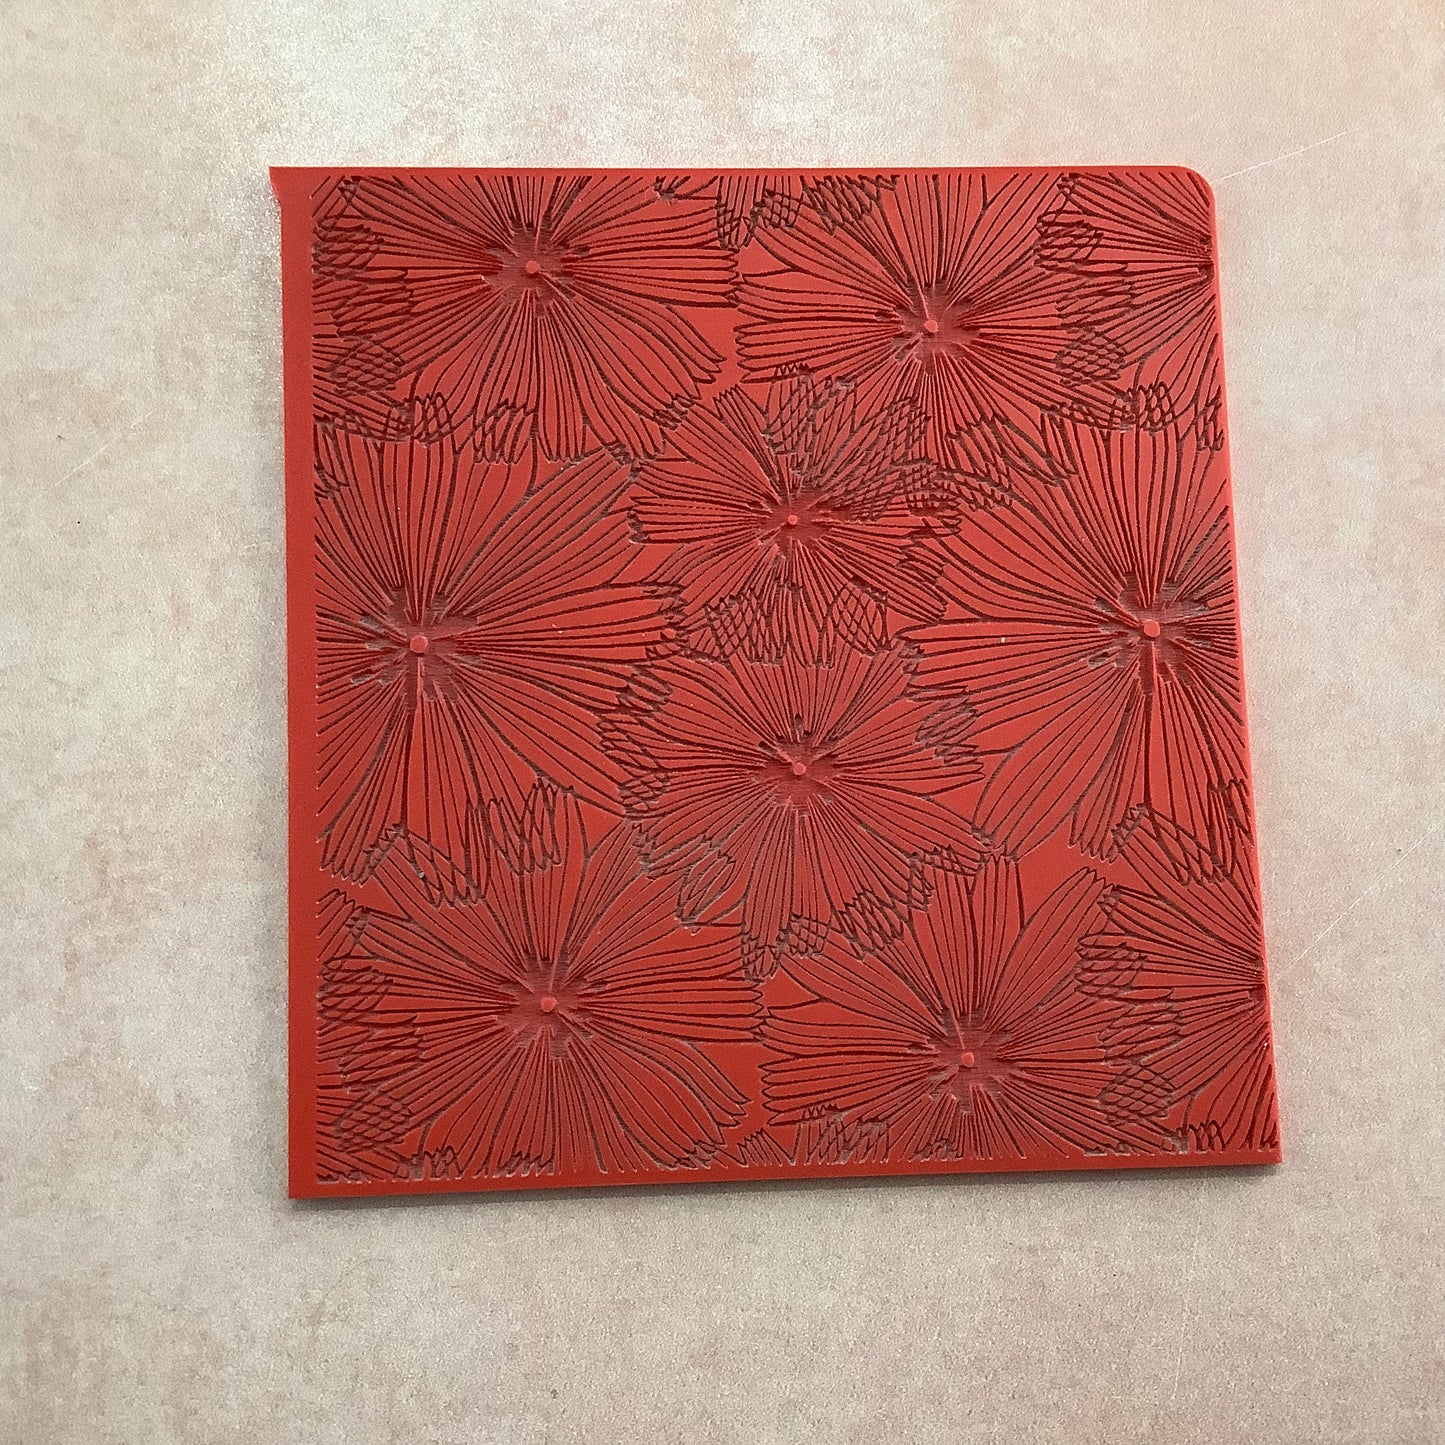 Wishing Flower Boho Rubber Stamp Texture Sheet Mat for polymer clay metal clay mixed media art